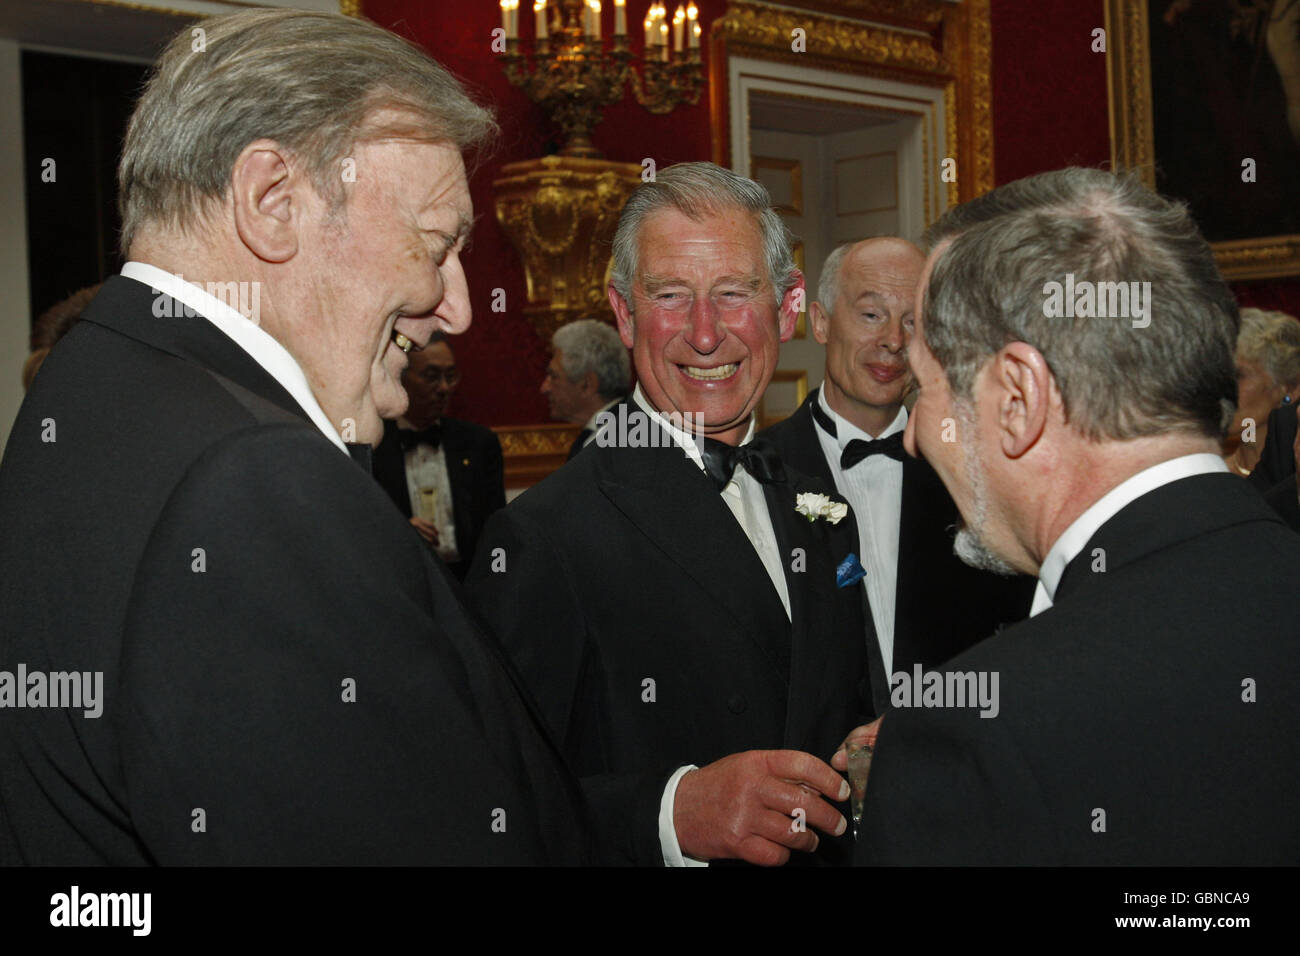 Britain's Prince Charles, the Prince of Wales (centre) talks to unidentified guests, during a reception for Nobel Laureates and climate change experts, at St James's Palace in London, Stock Photo